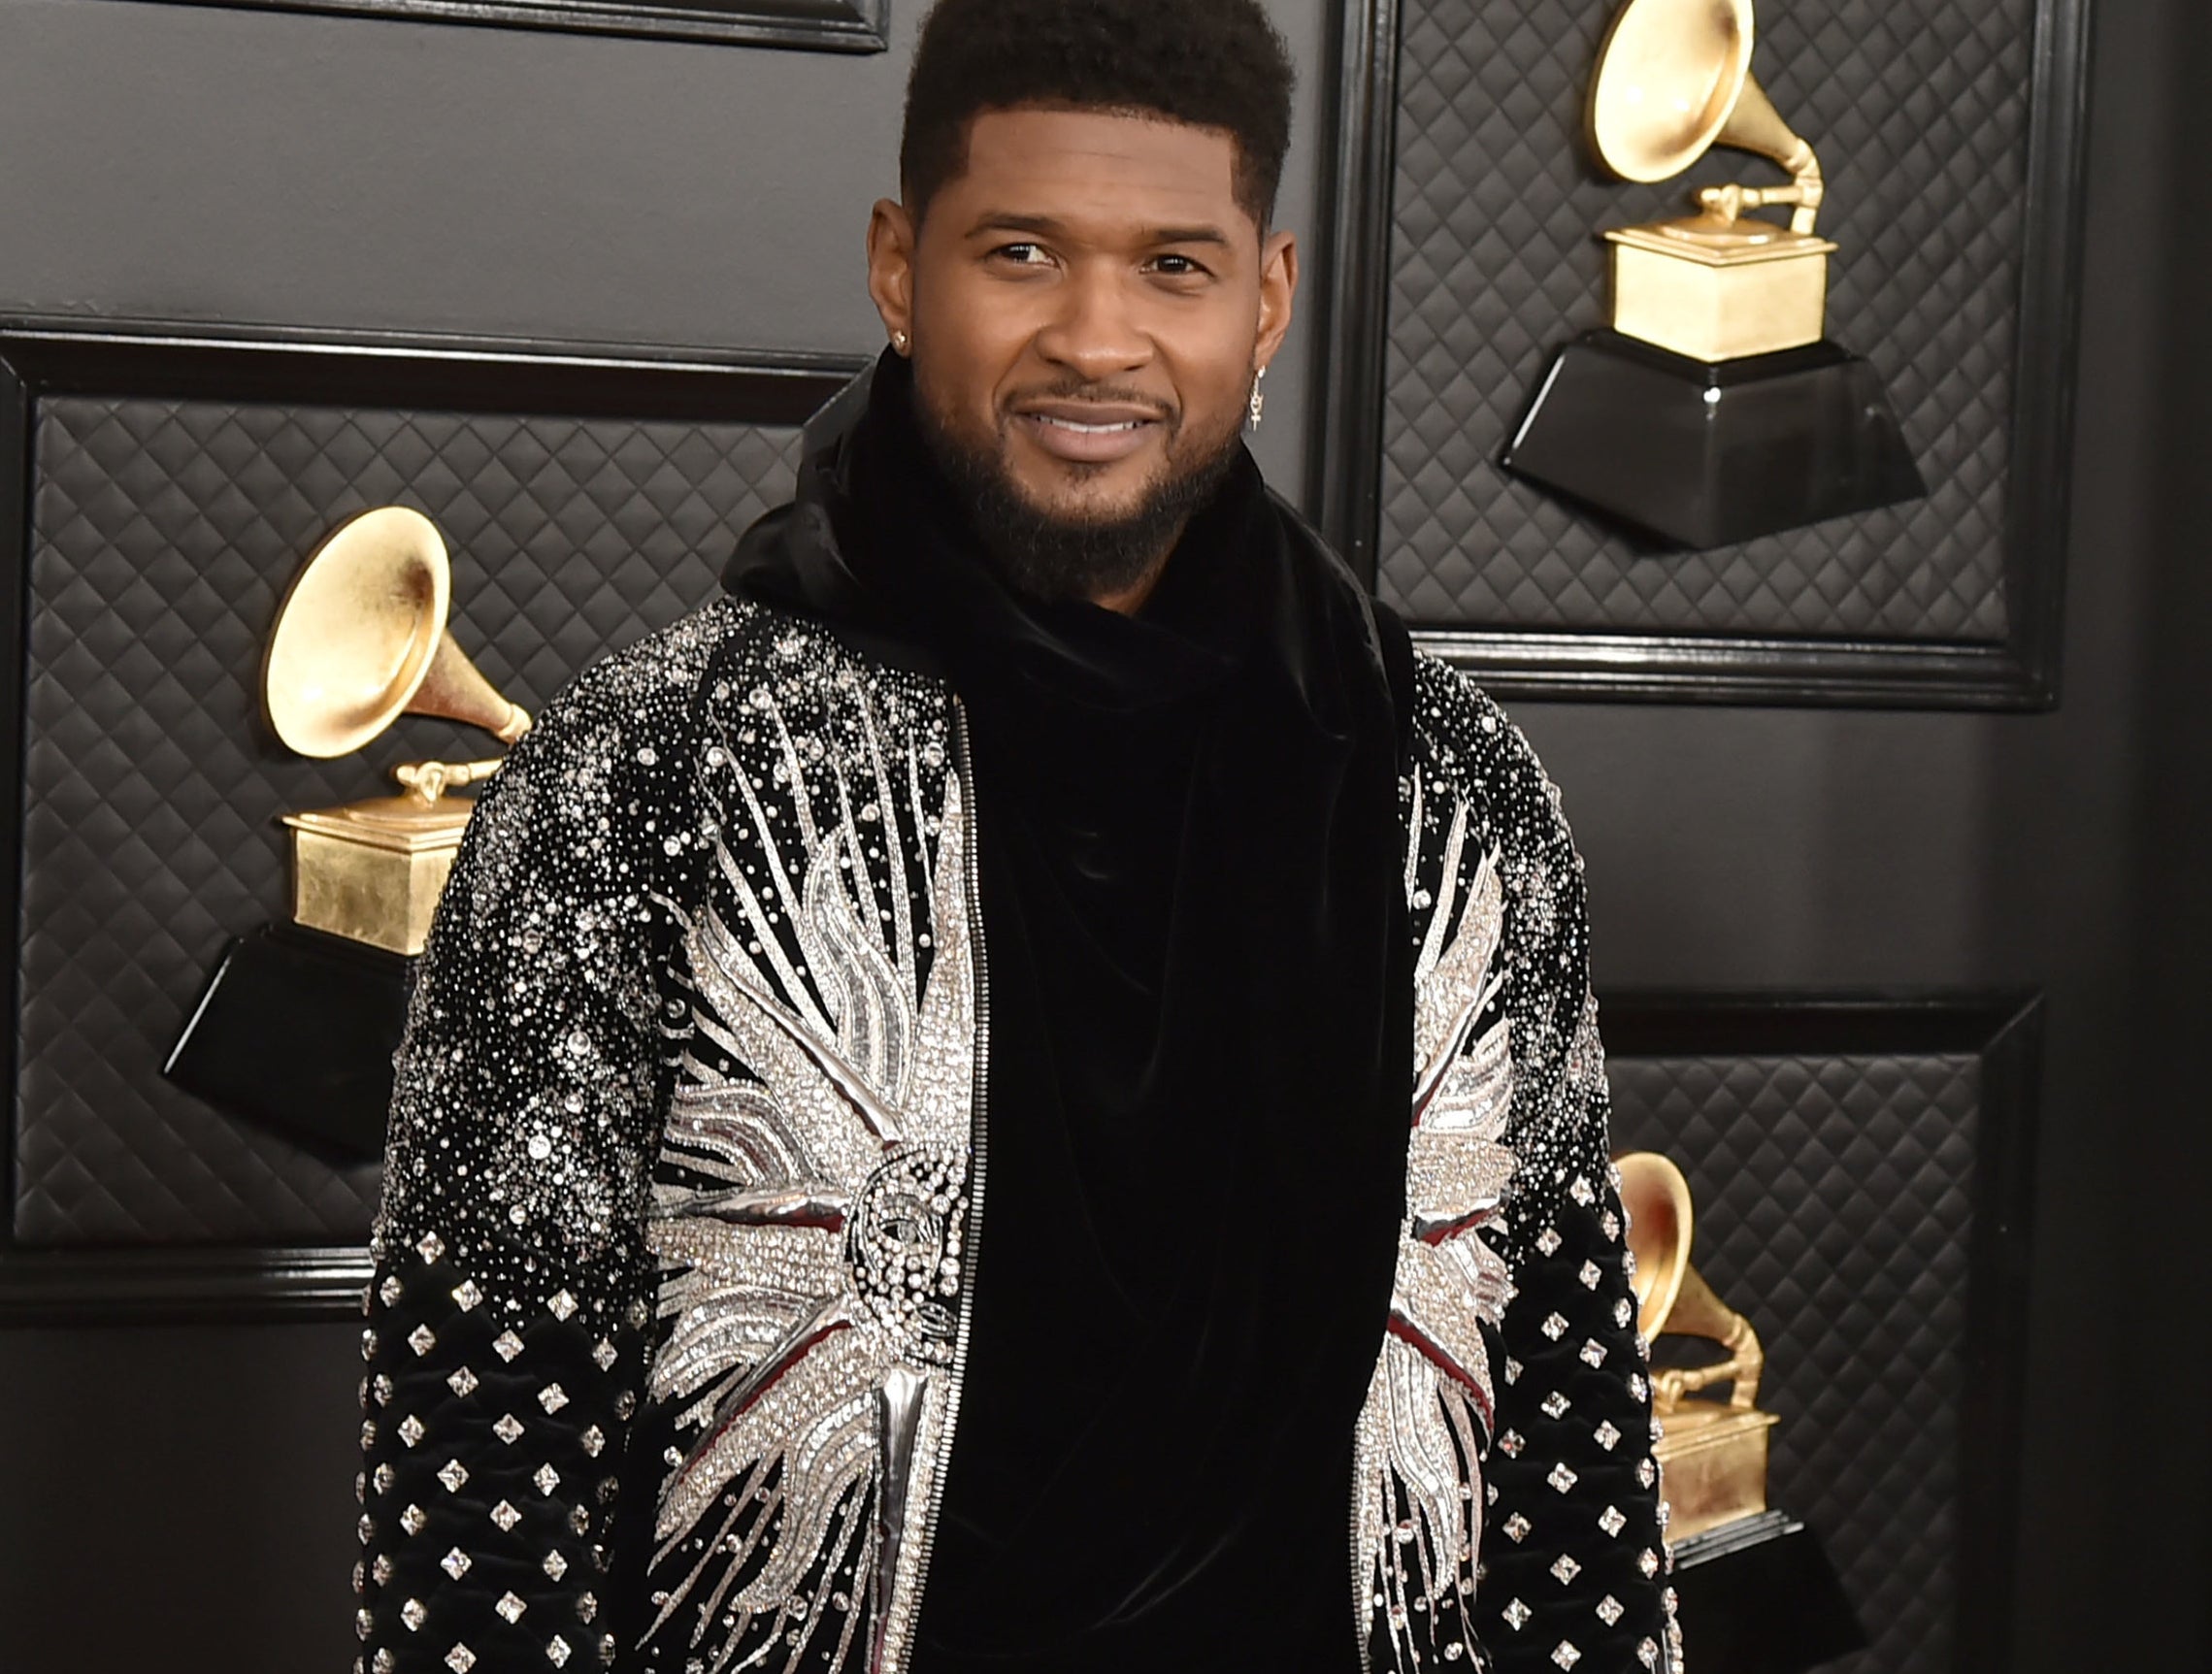 Usher wears a black sweatshirt while on a red carpet